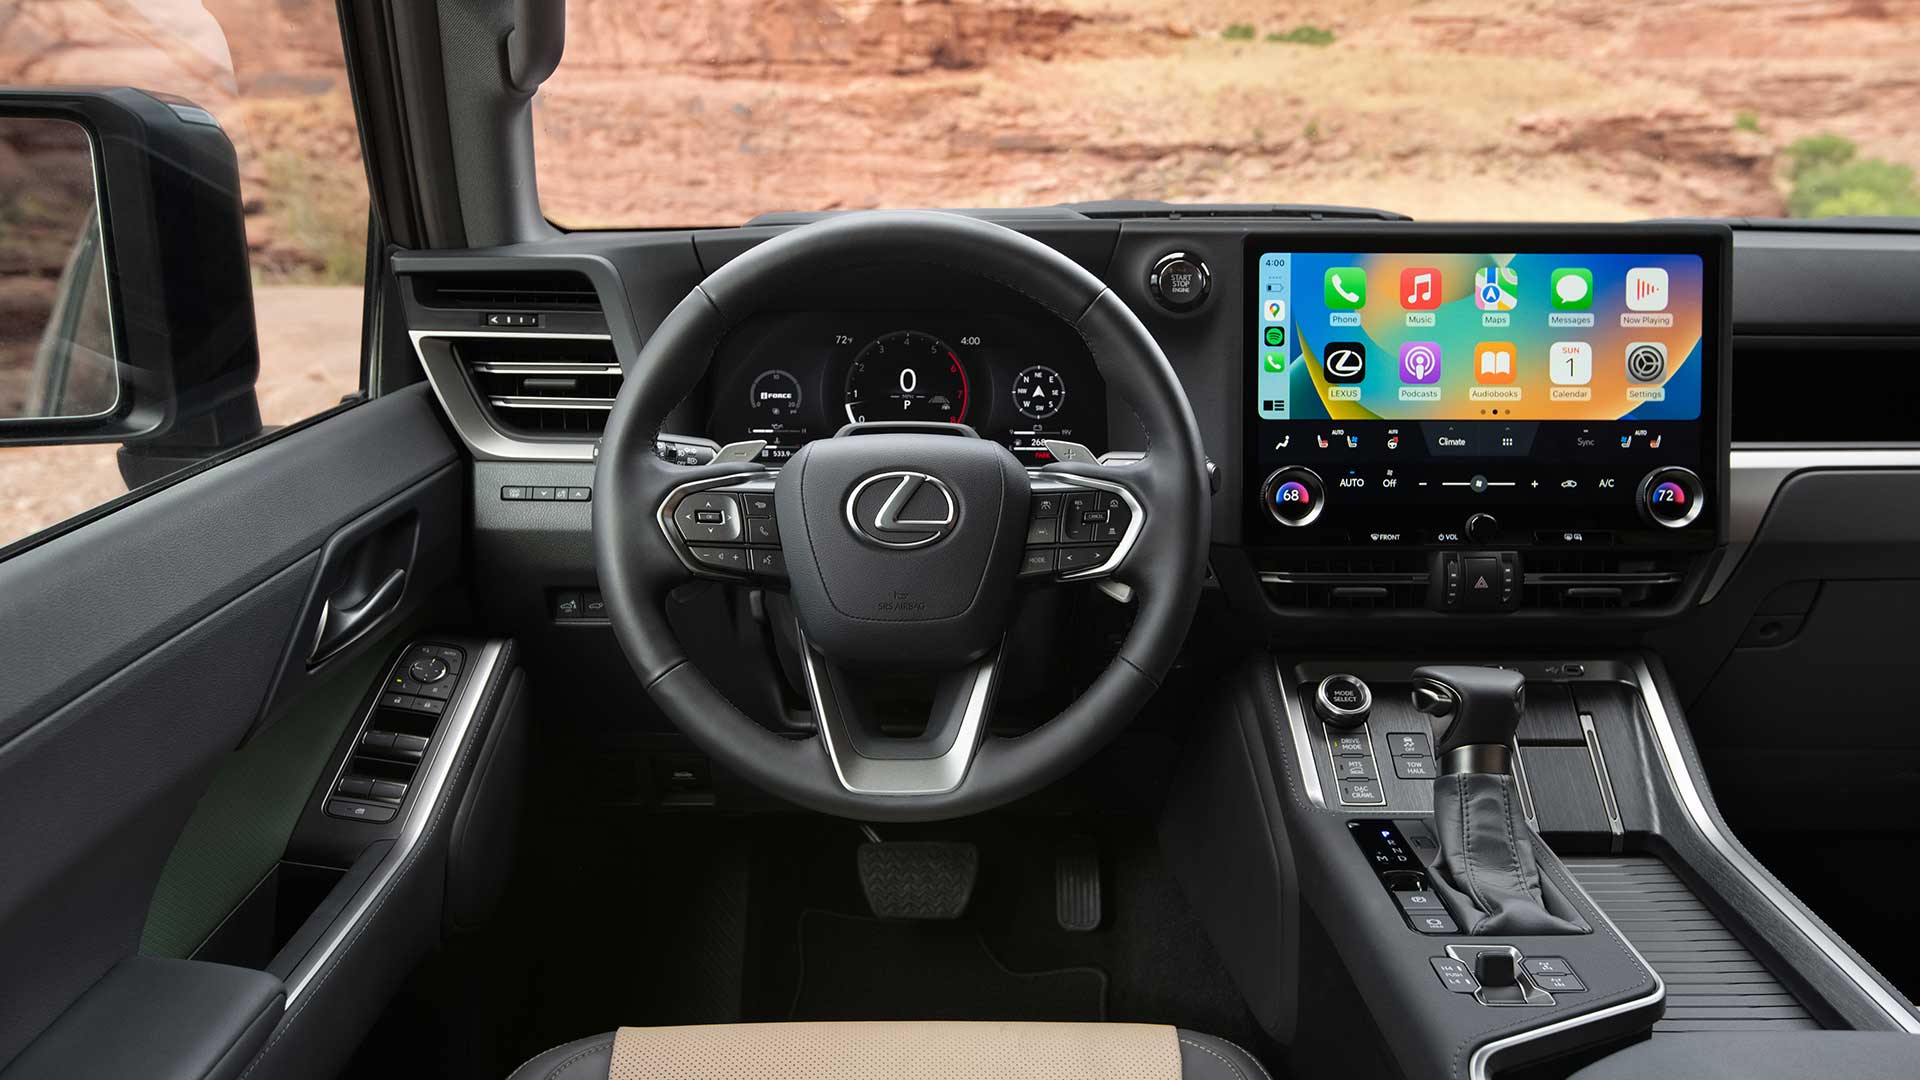 GX interior features the Tazuna concept of logical placement of all controls allowing the driver to focus on the road ahead.